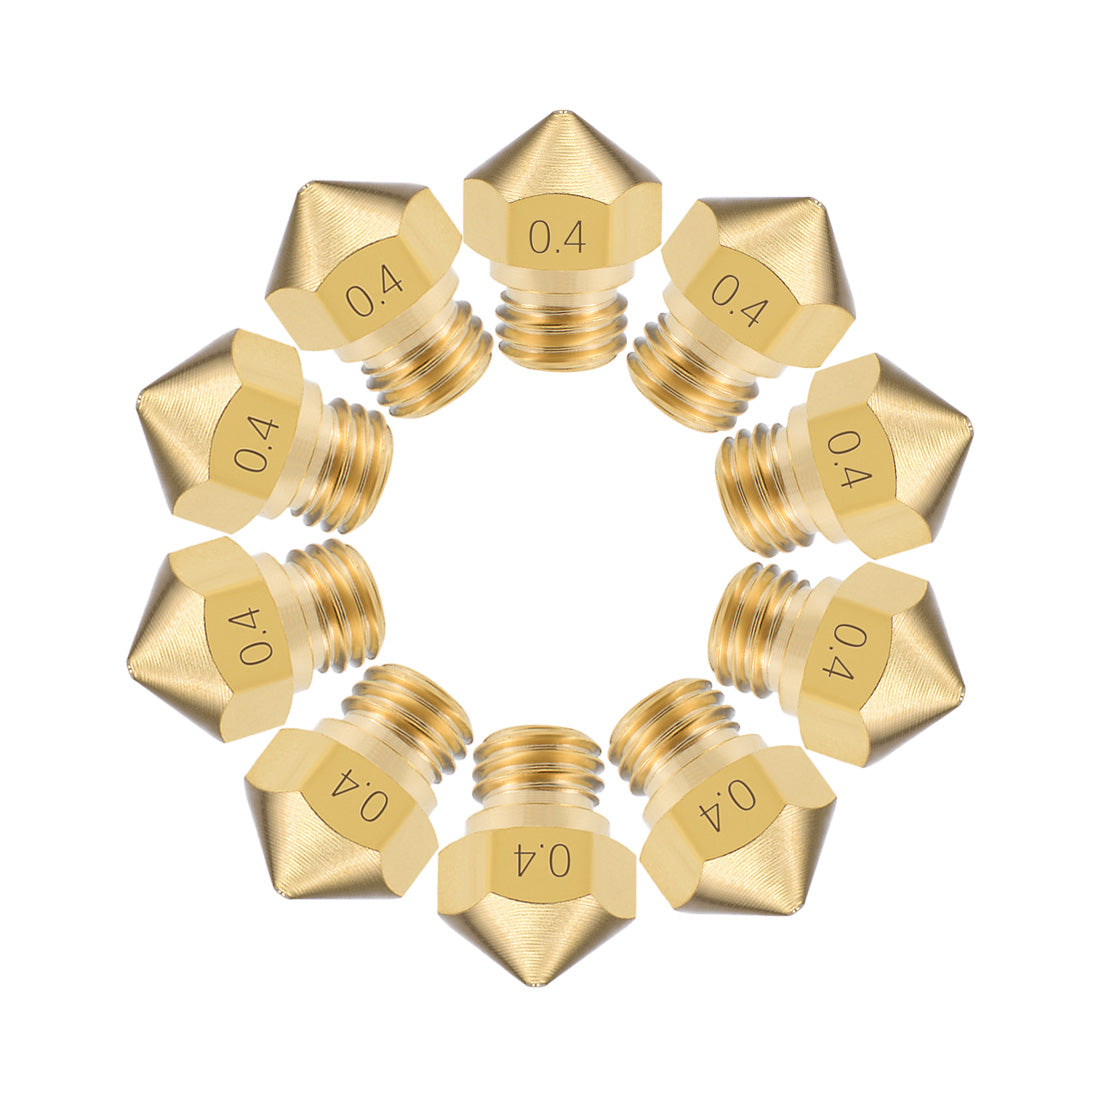 uxcell Uxcell 0.4mm 3D Printer Nozzle Head M7 for MK10 1.75mm Extruder Print, Brass 10pcs